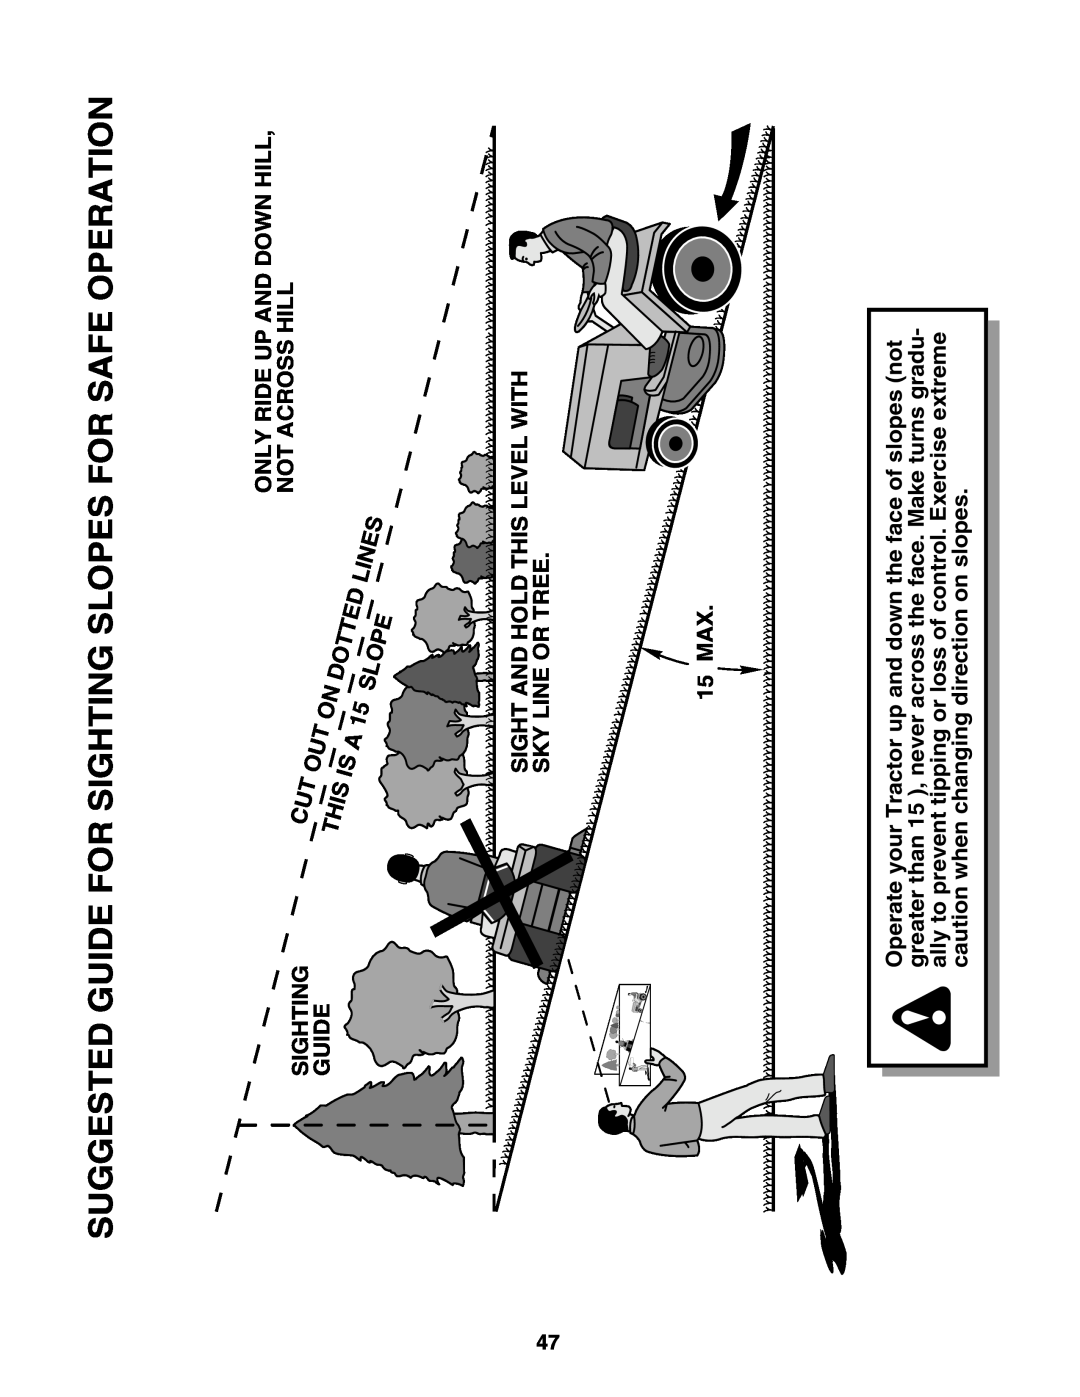 Weed Eater 178387 owner manual Suggested Guide For Sighting Slopes For Safe Operation 